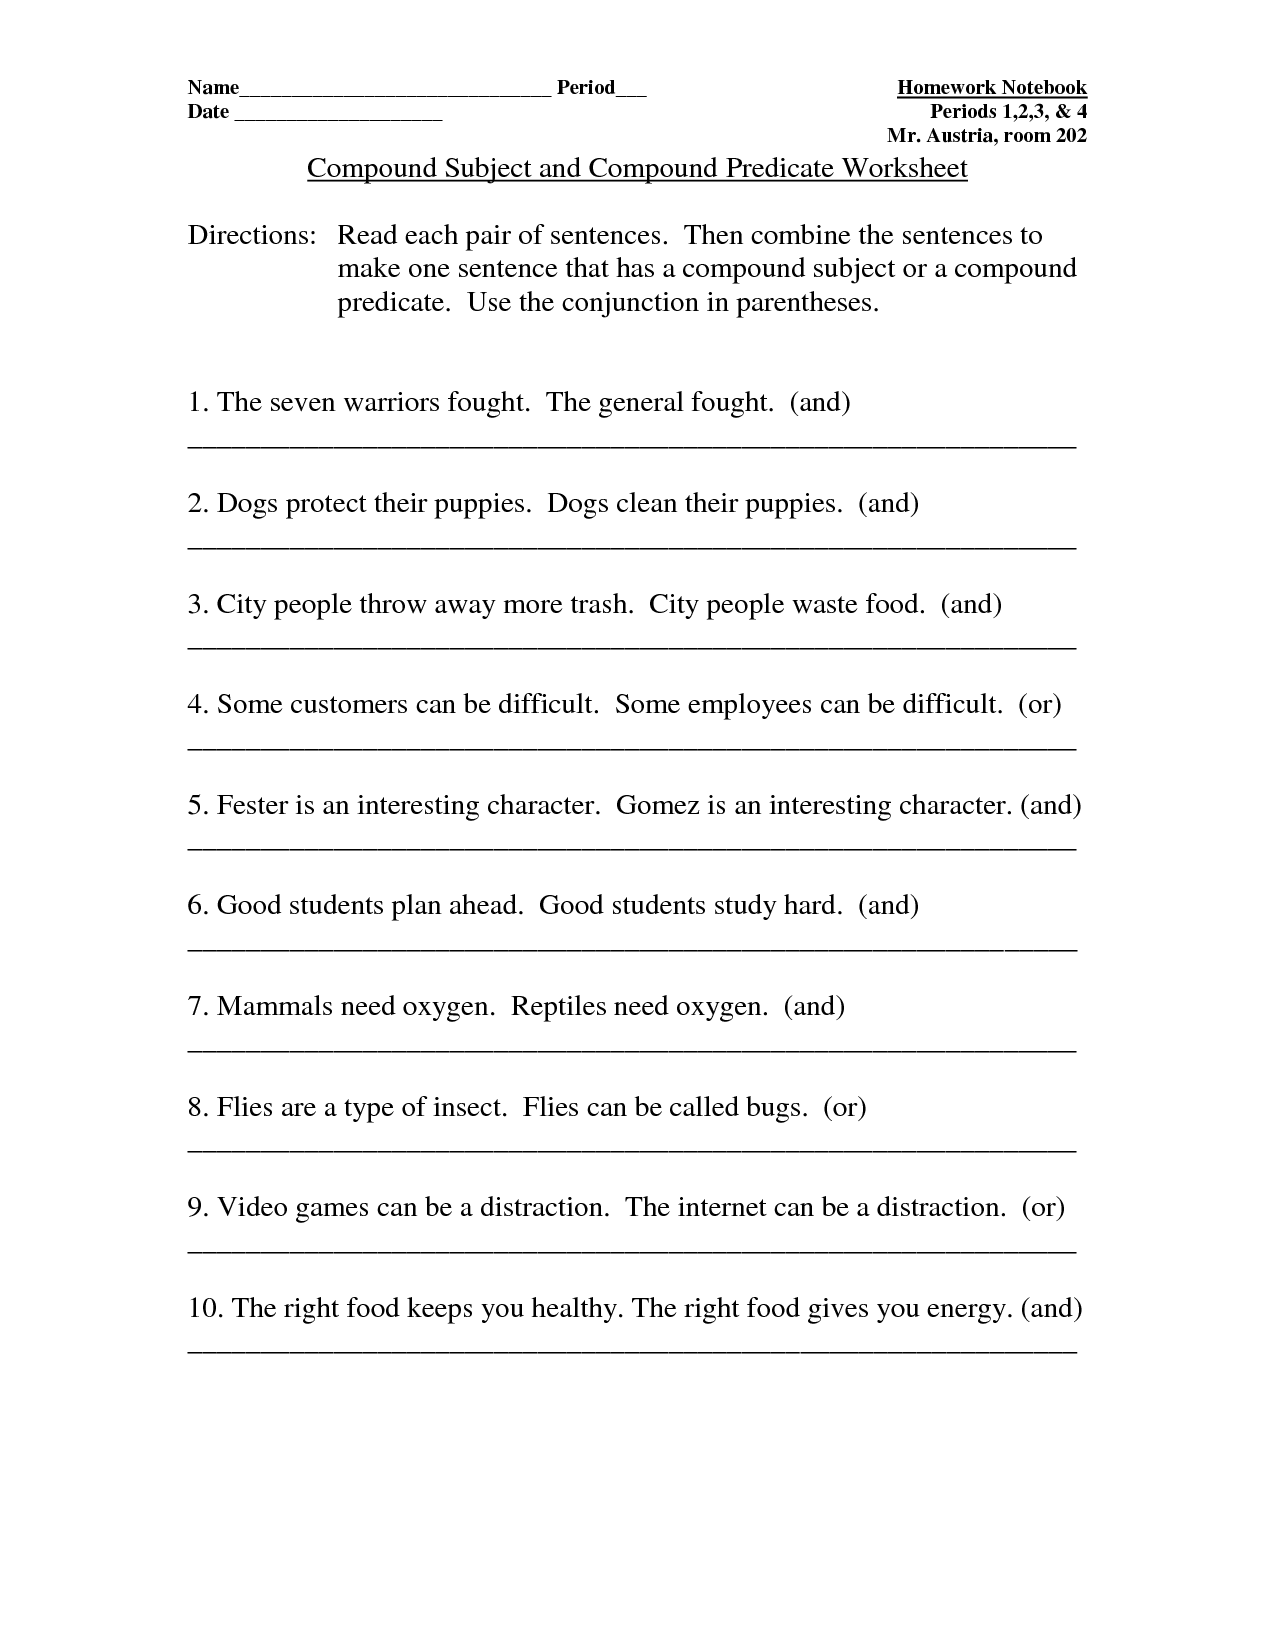 Simple and Compound Subjects Worksheets Image